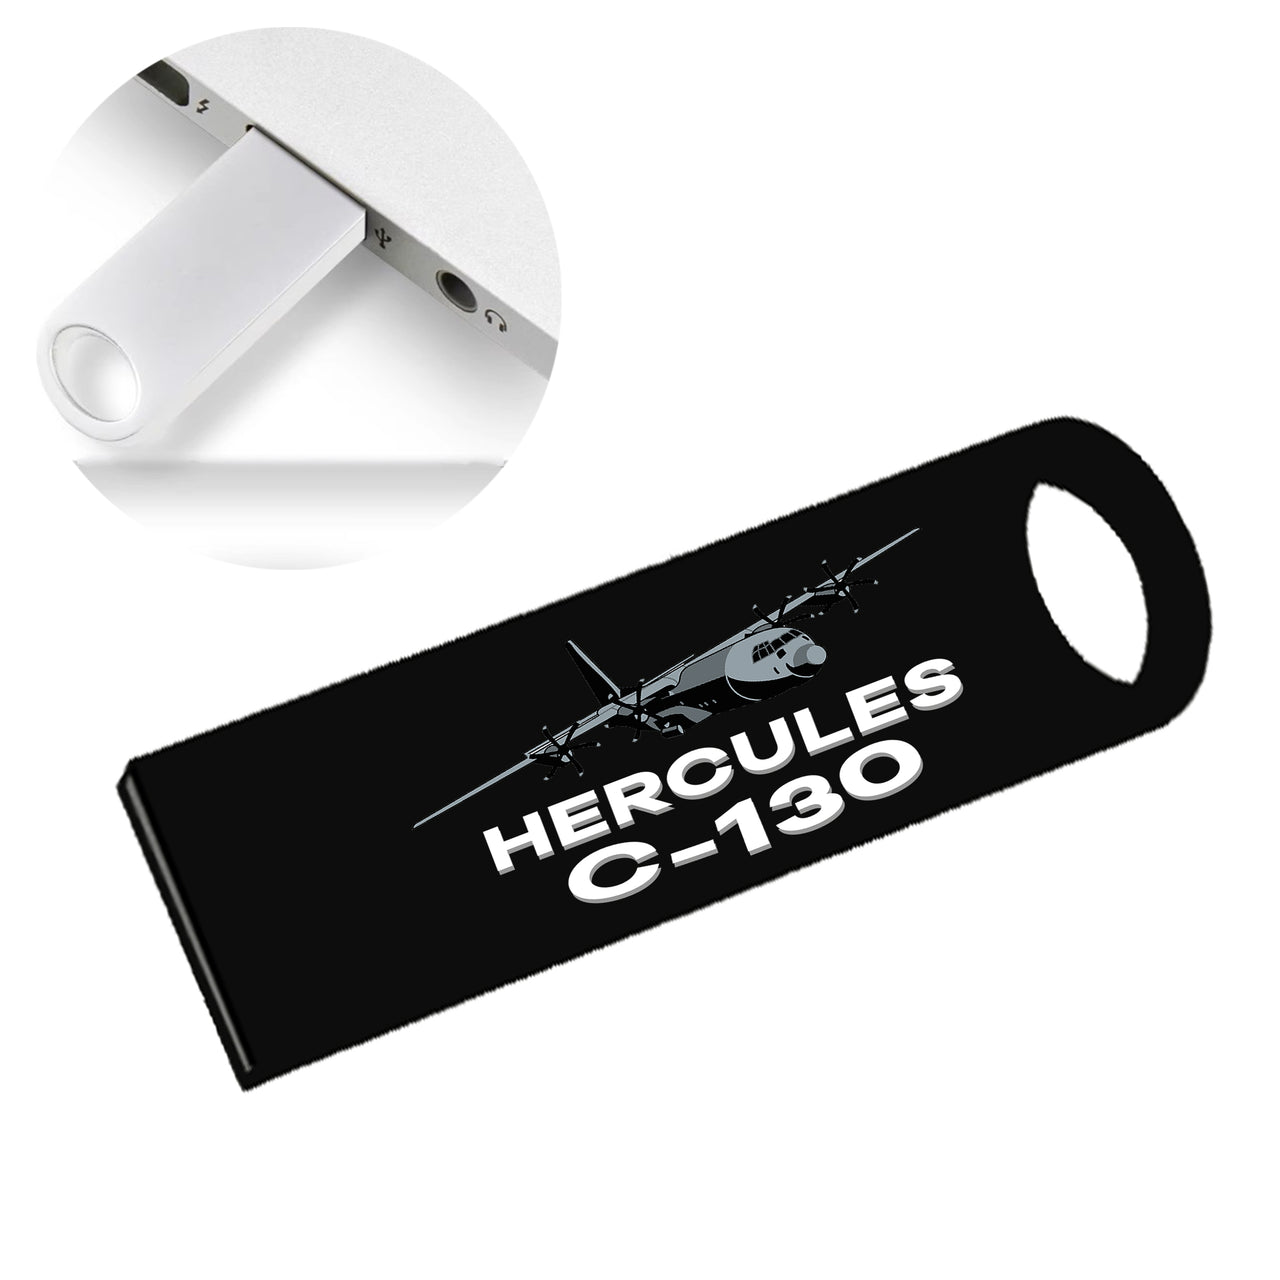 The Hercules C130 Designed Waterproof USB Devices